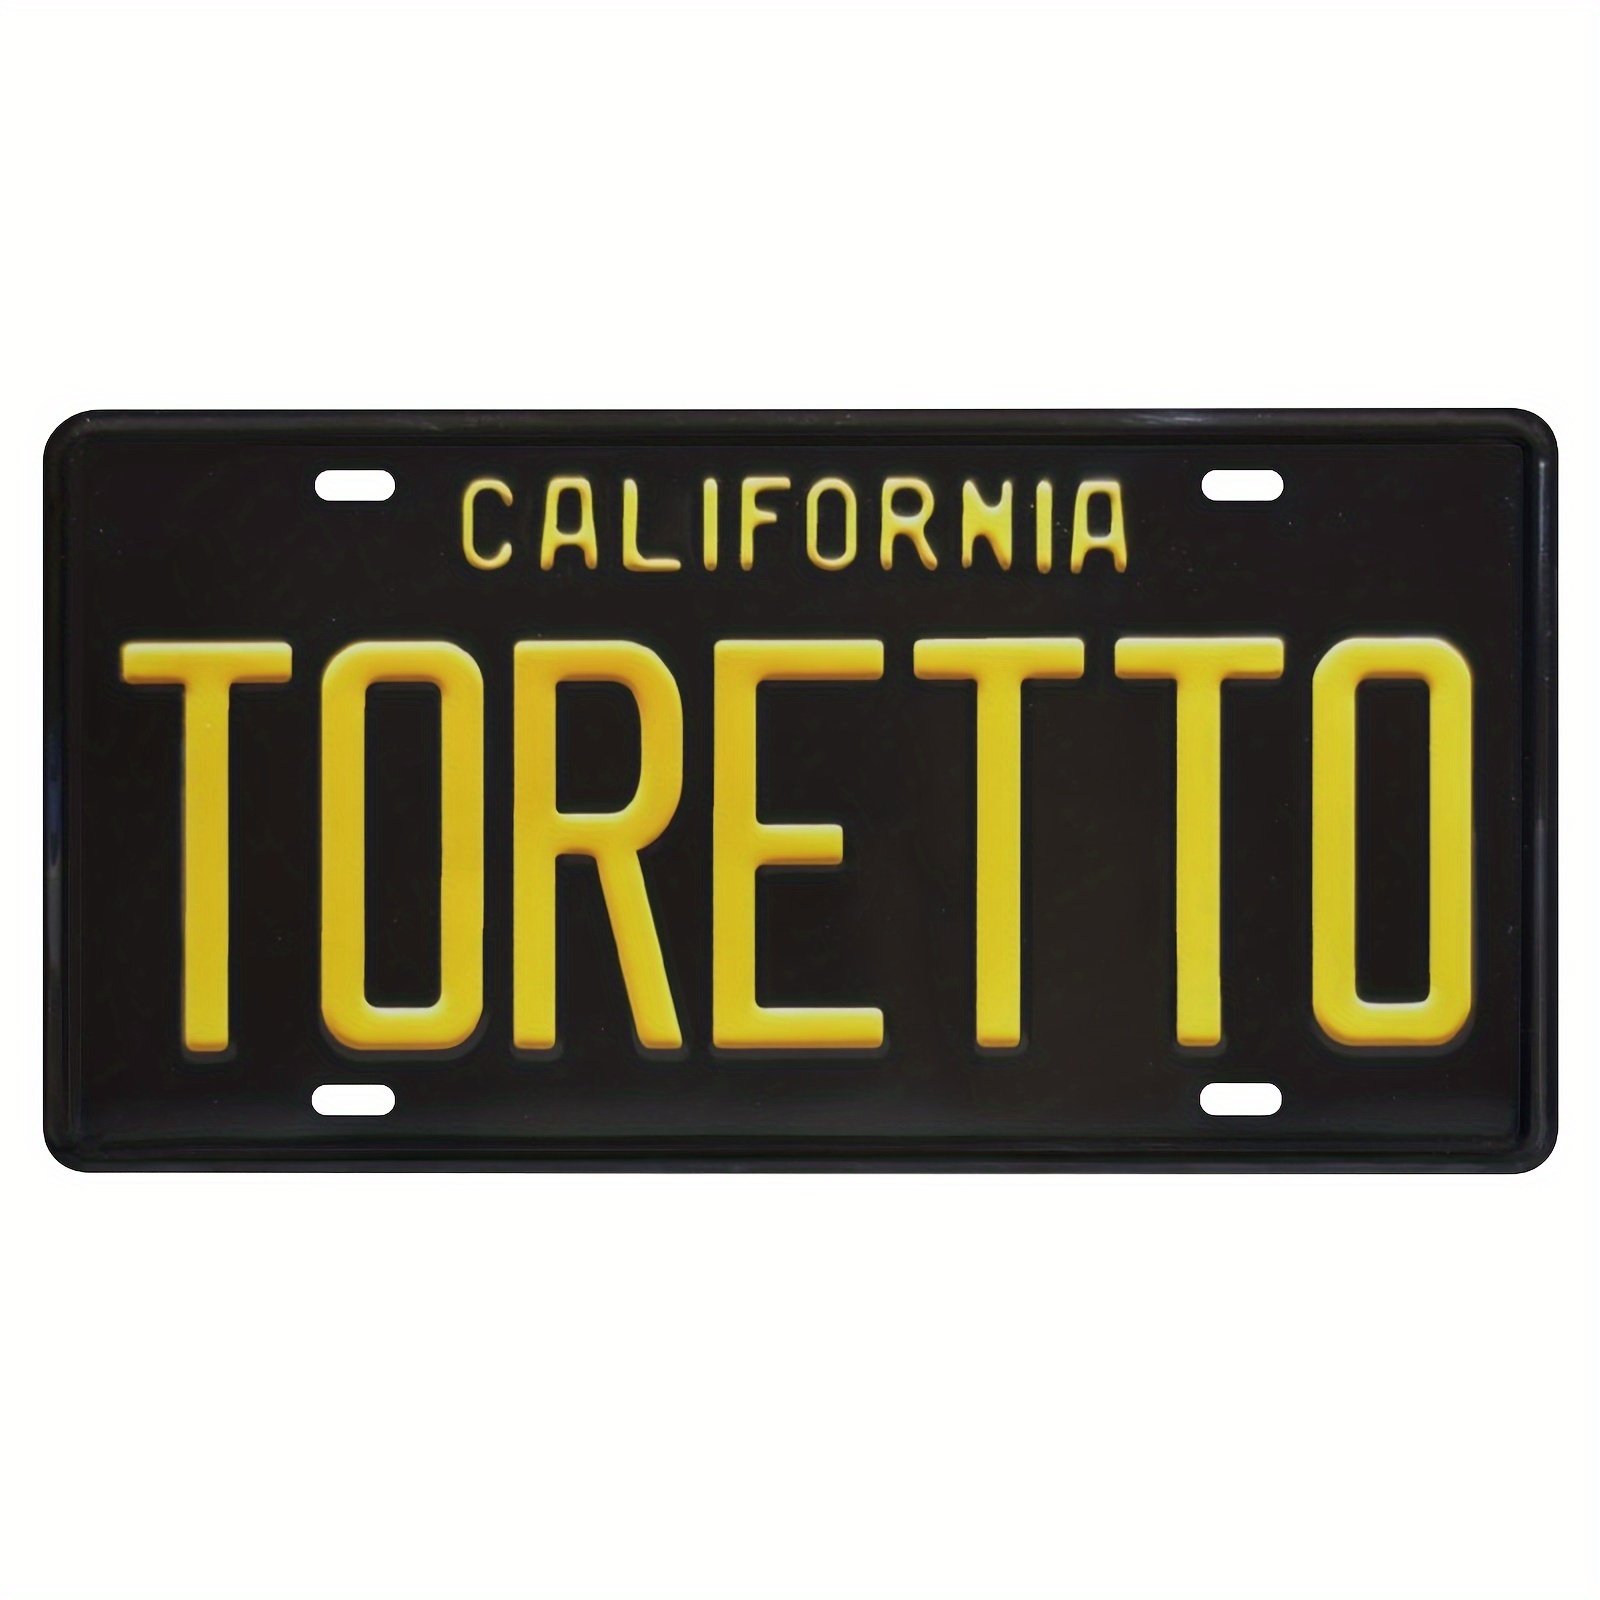 

Cool Minimalist, Trendy License Plates, Decorative License Plates, Used To Decorate Your Own Car, A Must-have For Fashion Enthusiasts